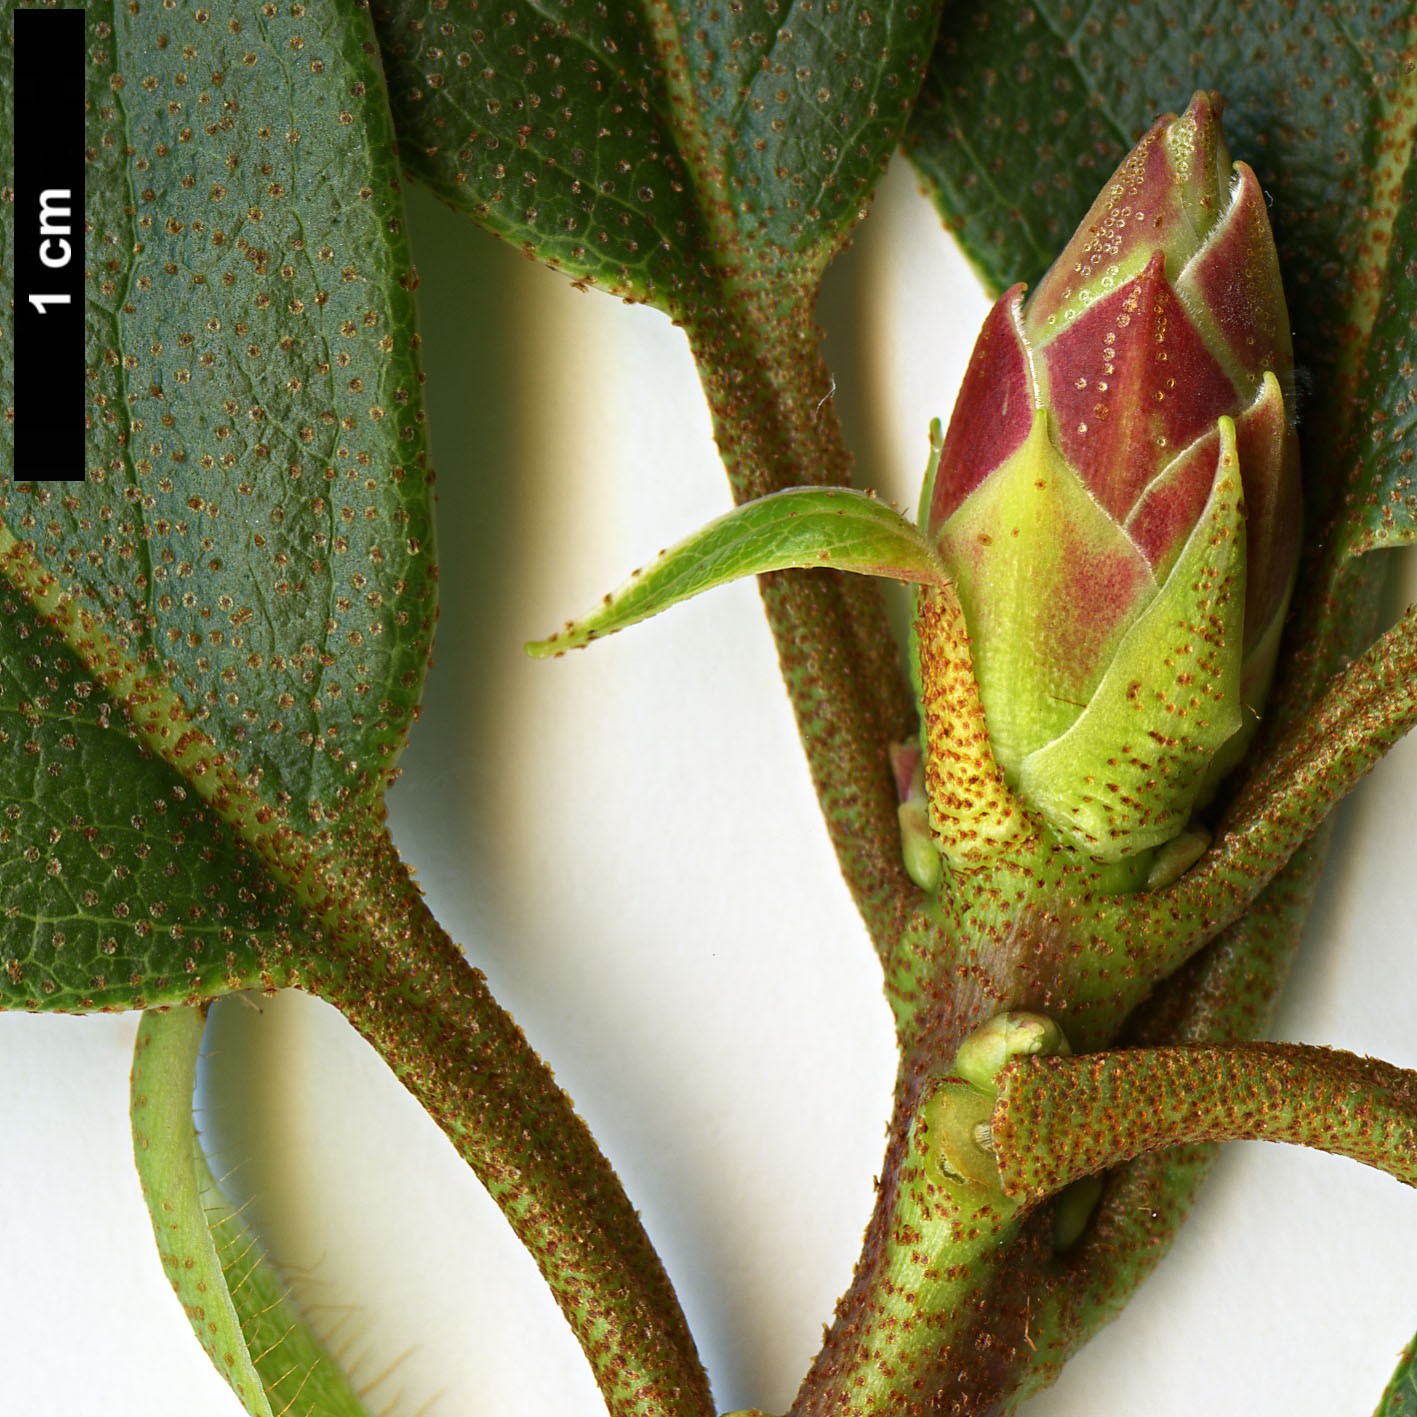 High resolution image: Family: Ericaceae - Genus: Rhododendron - Taxon: pachypodum